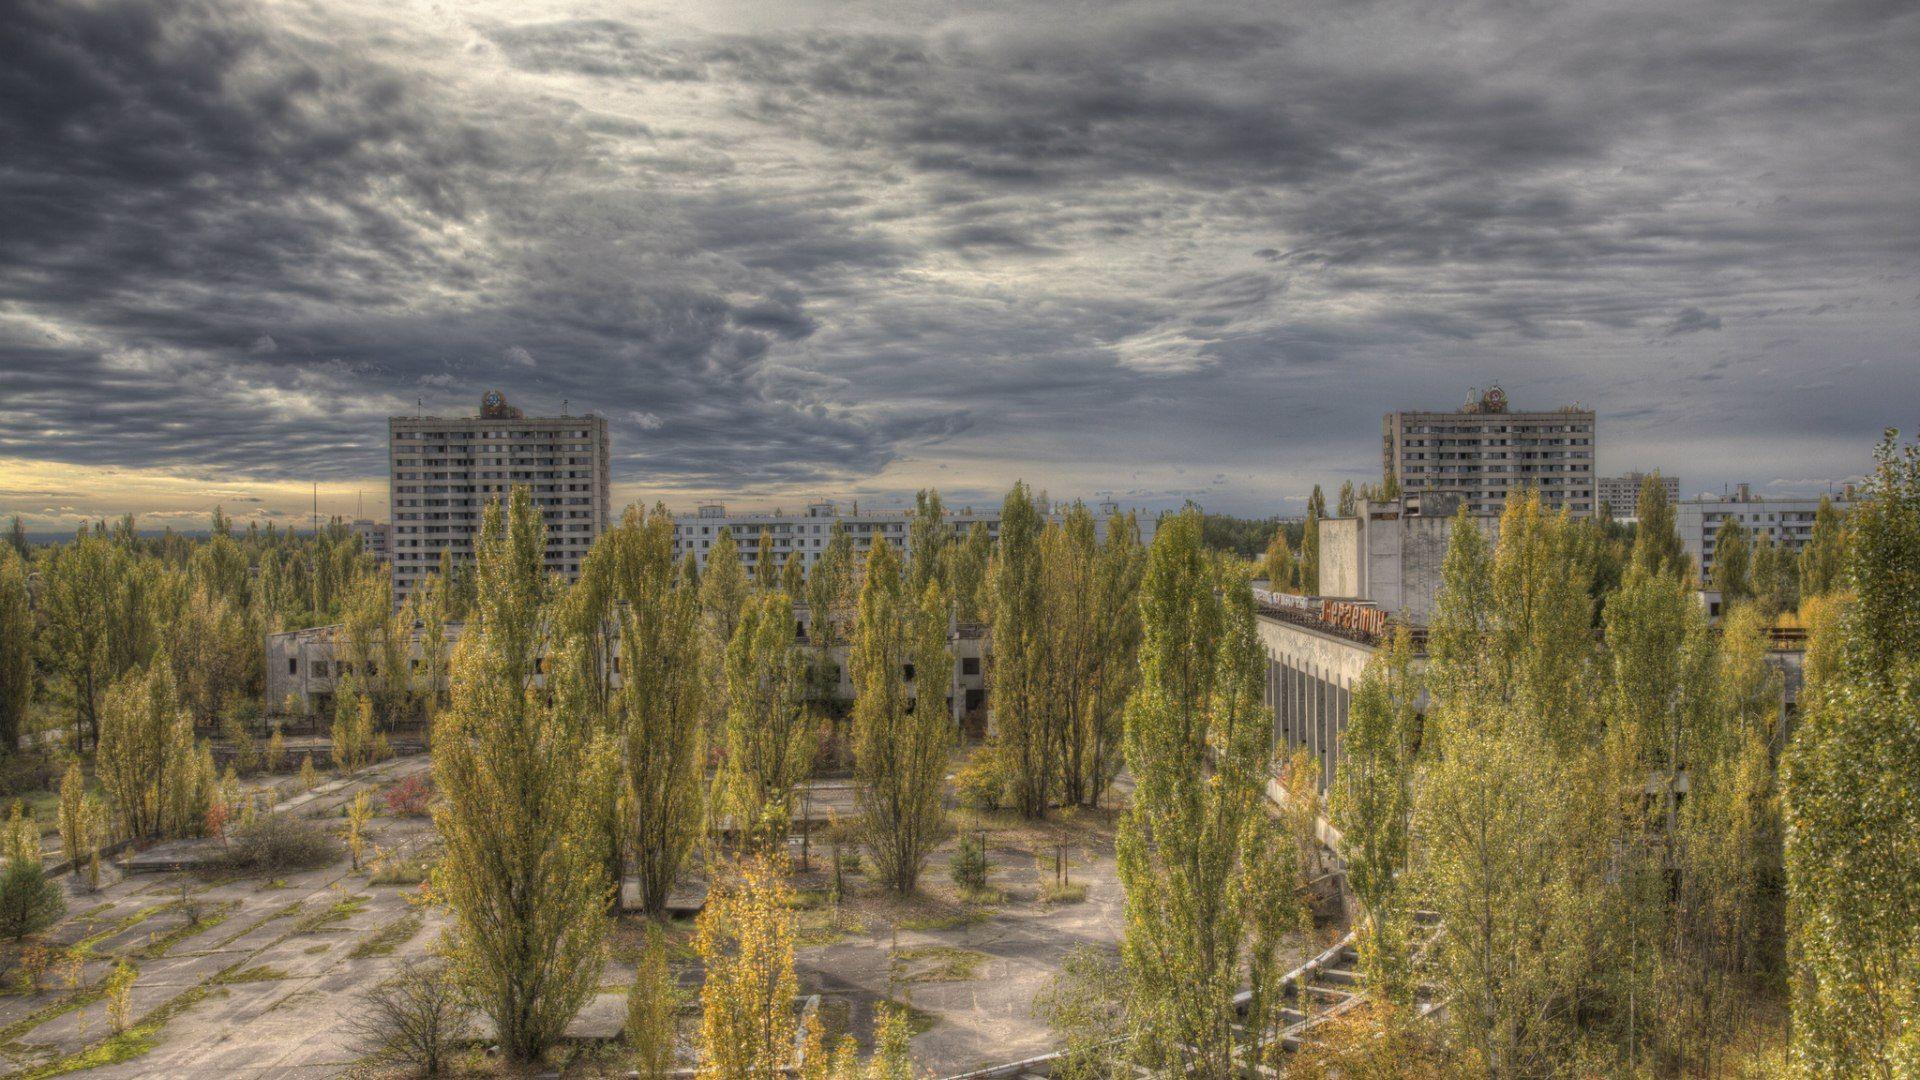 Ghost town of Pripyat in Ukraine wallpaper and image